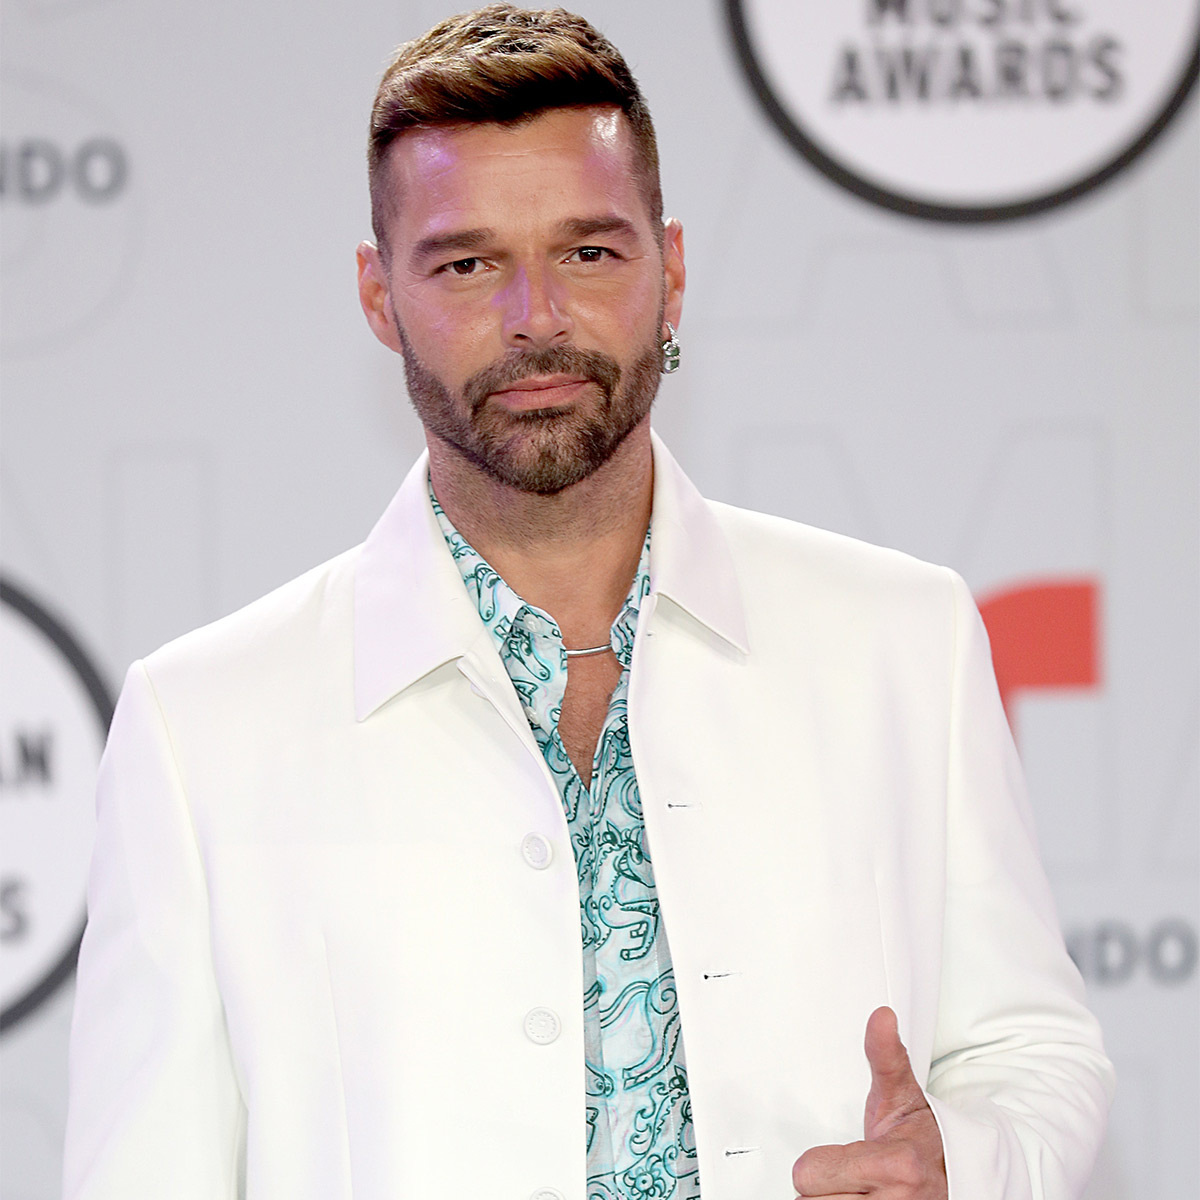 Ricky Martin Returns to the Stage After Case Against Him Is Dismissed